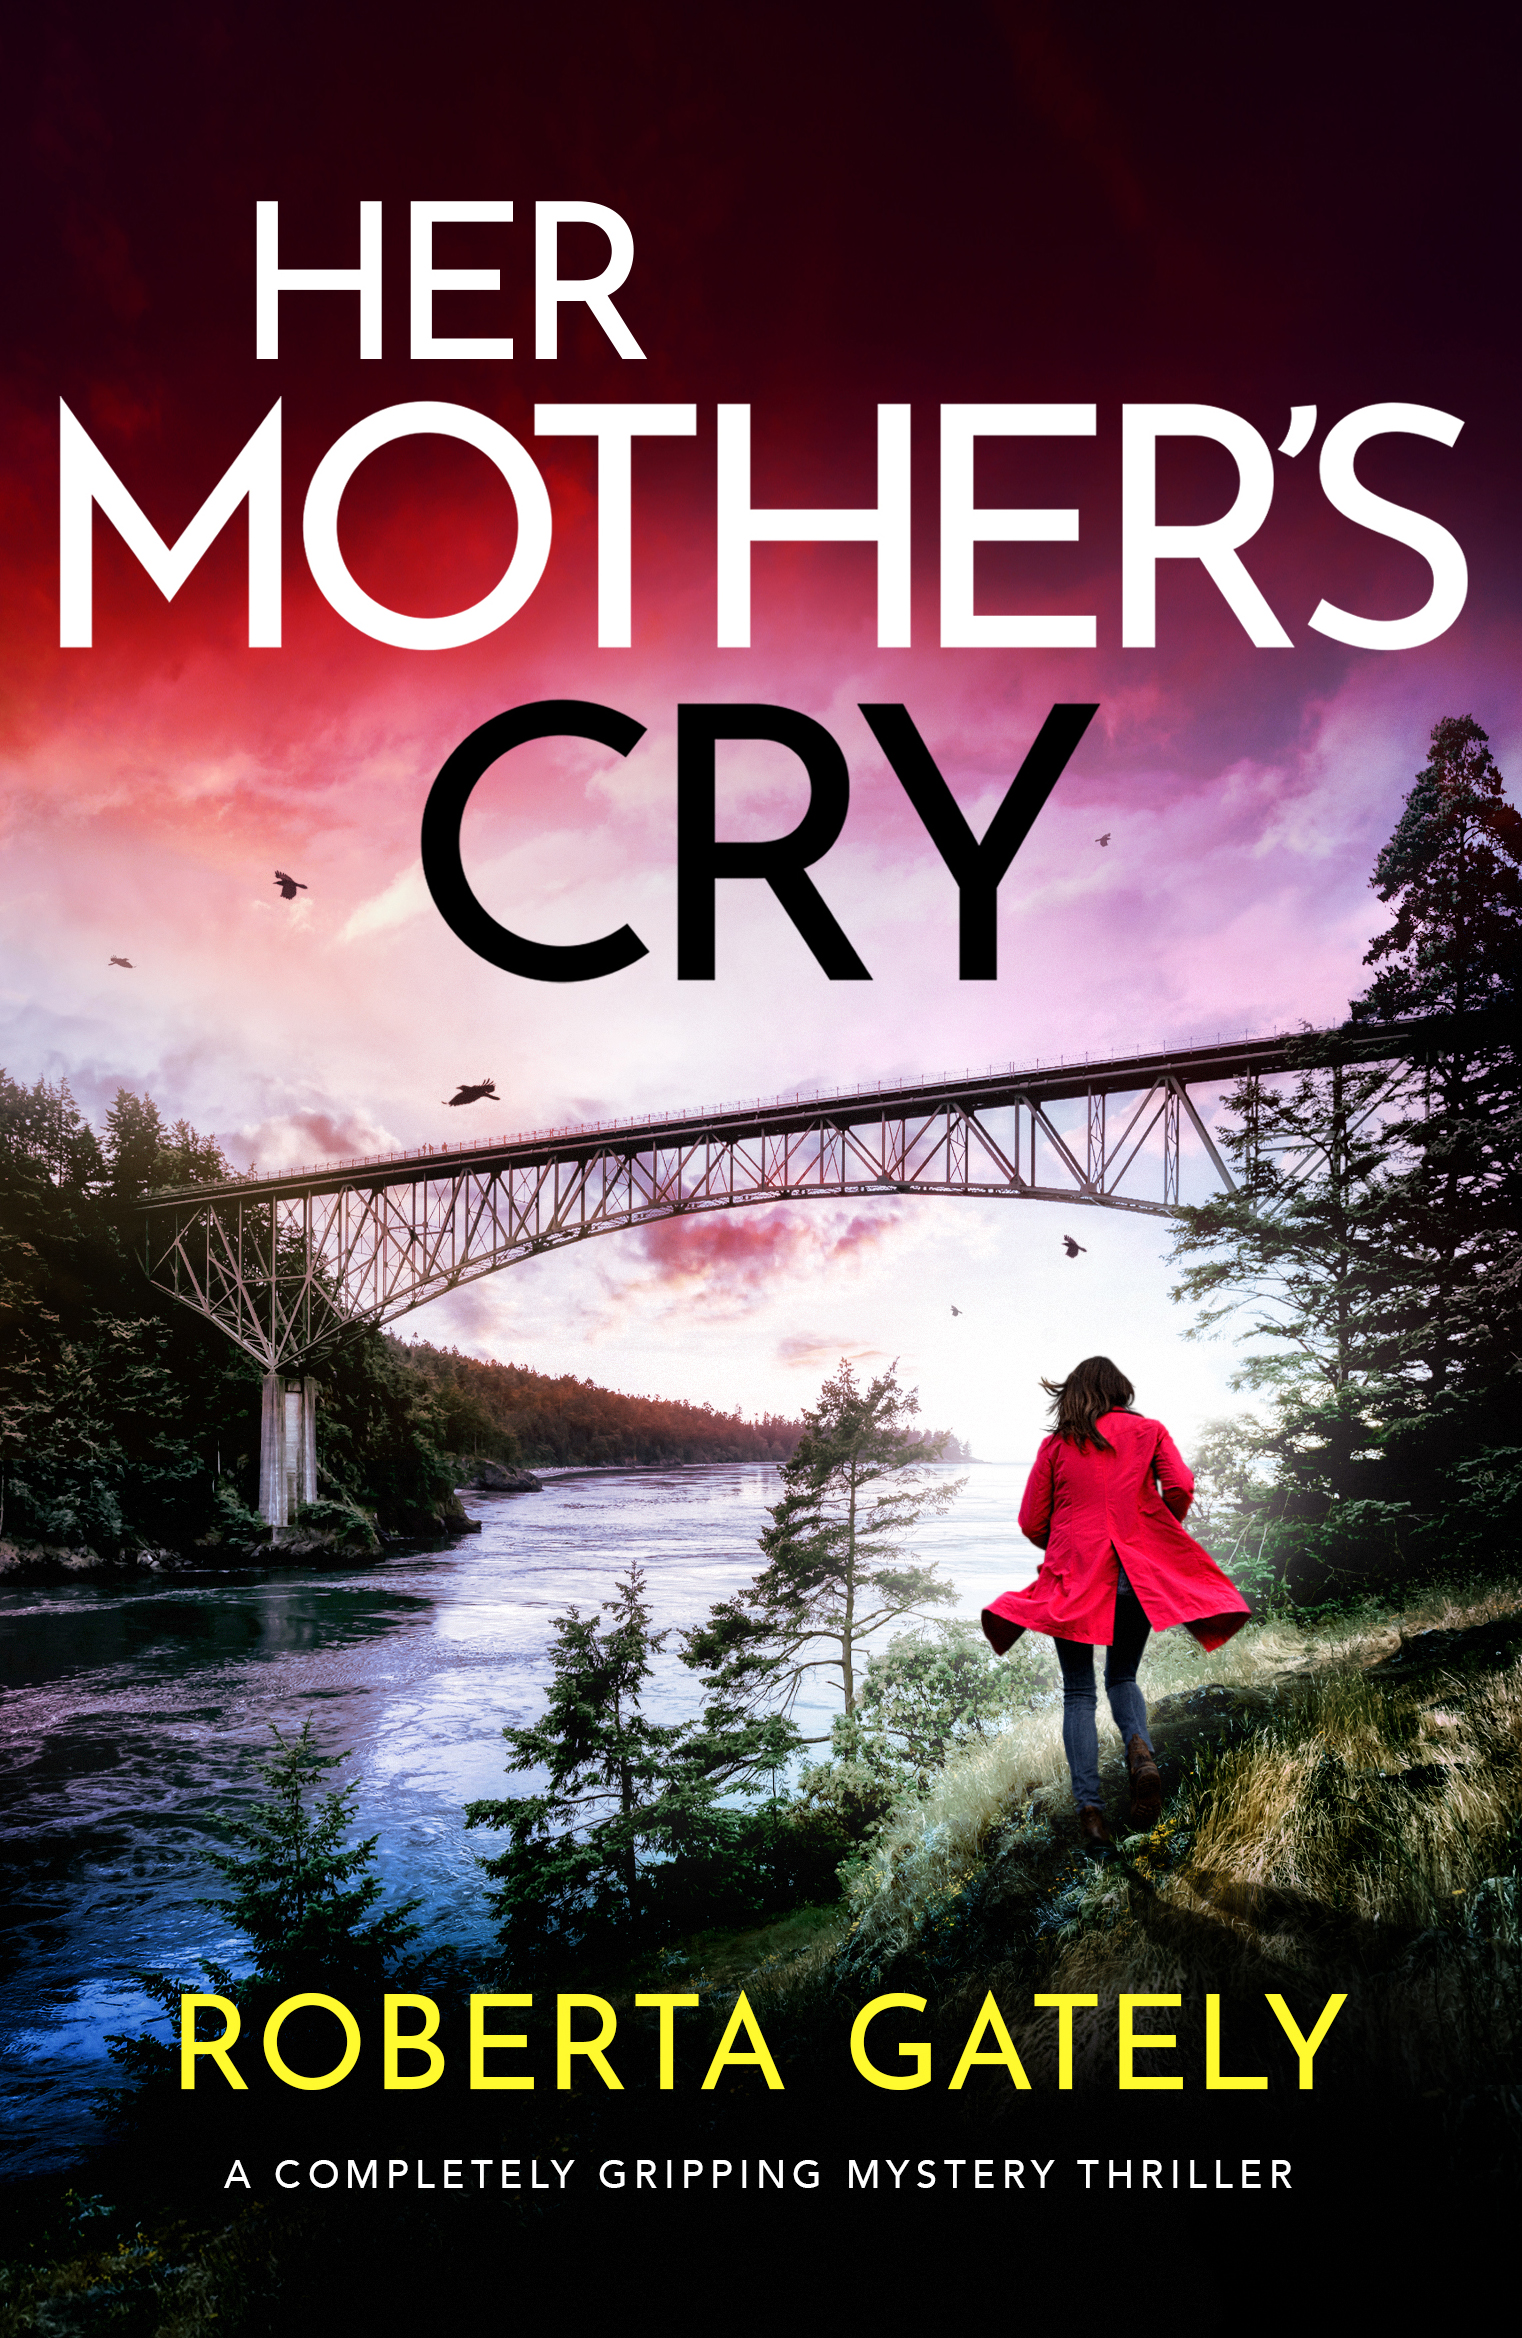 HER MOTHER-S CRY